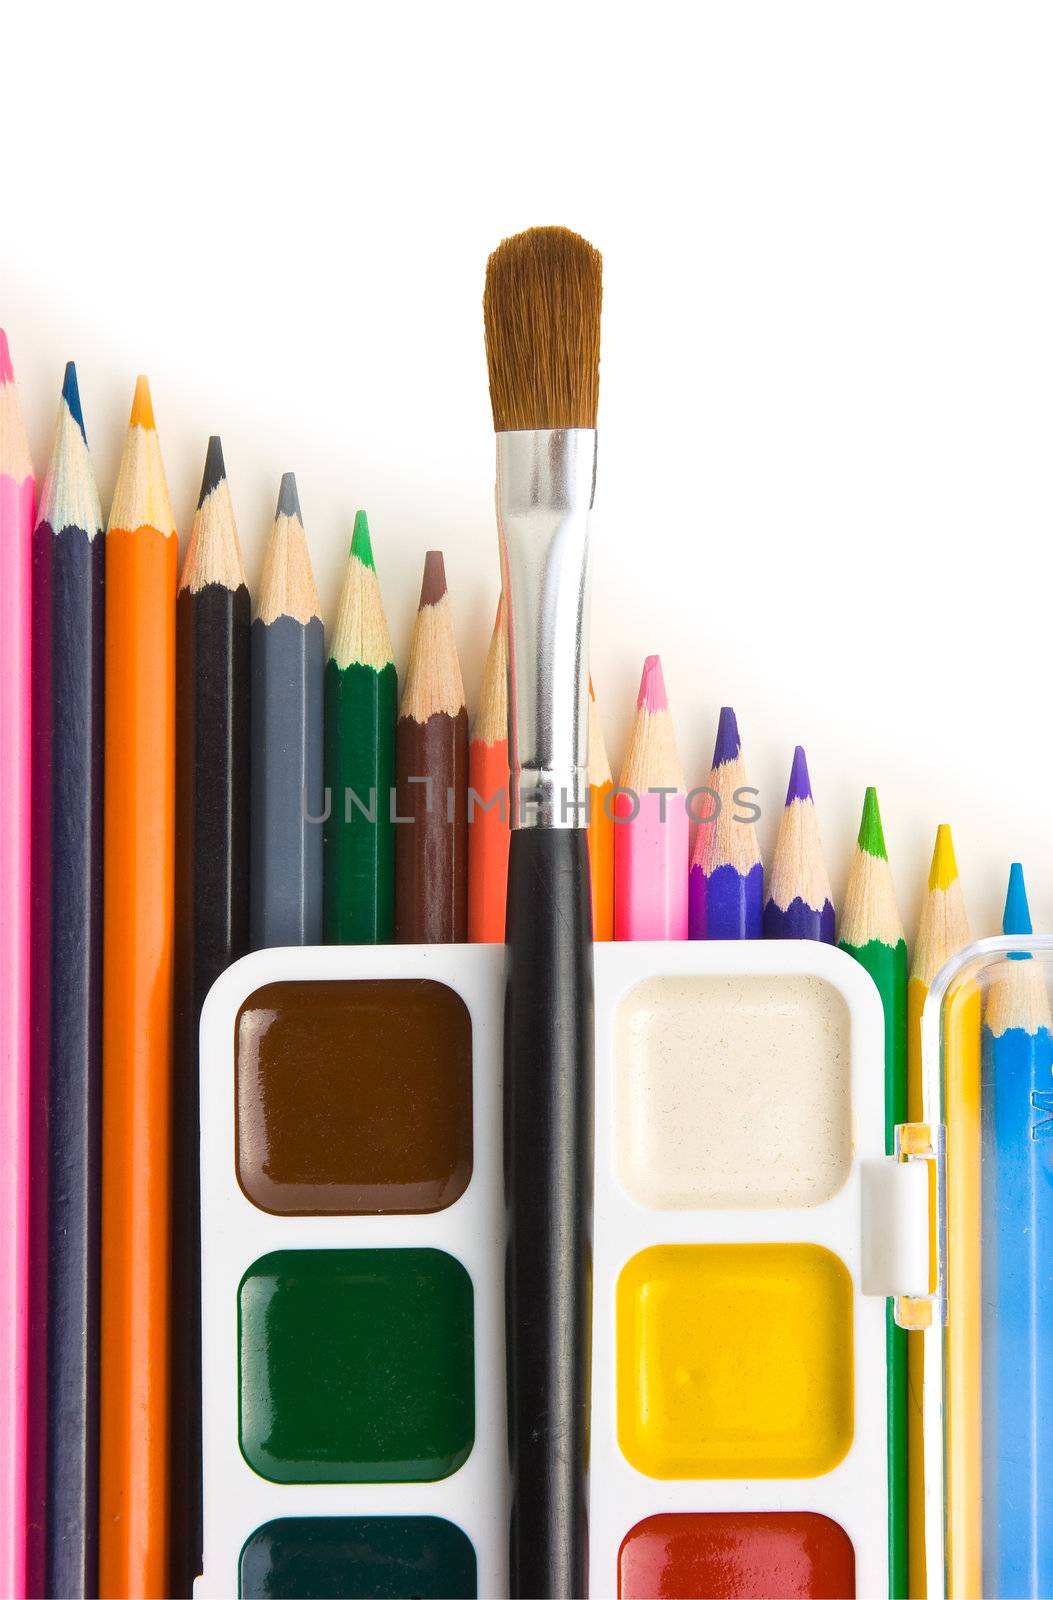 drawing tools isolated on white background